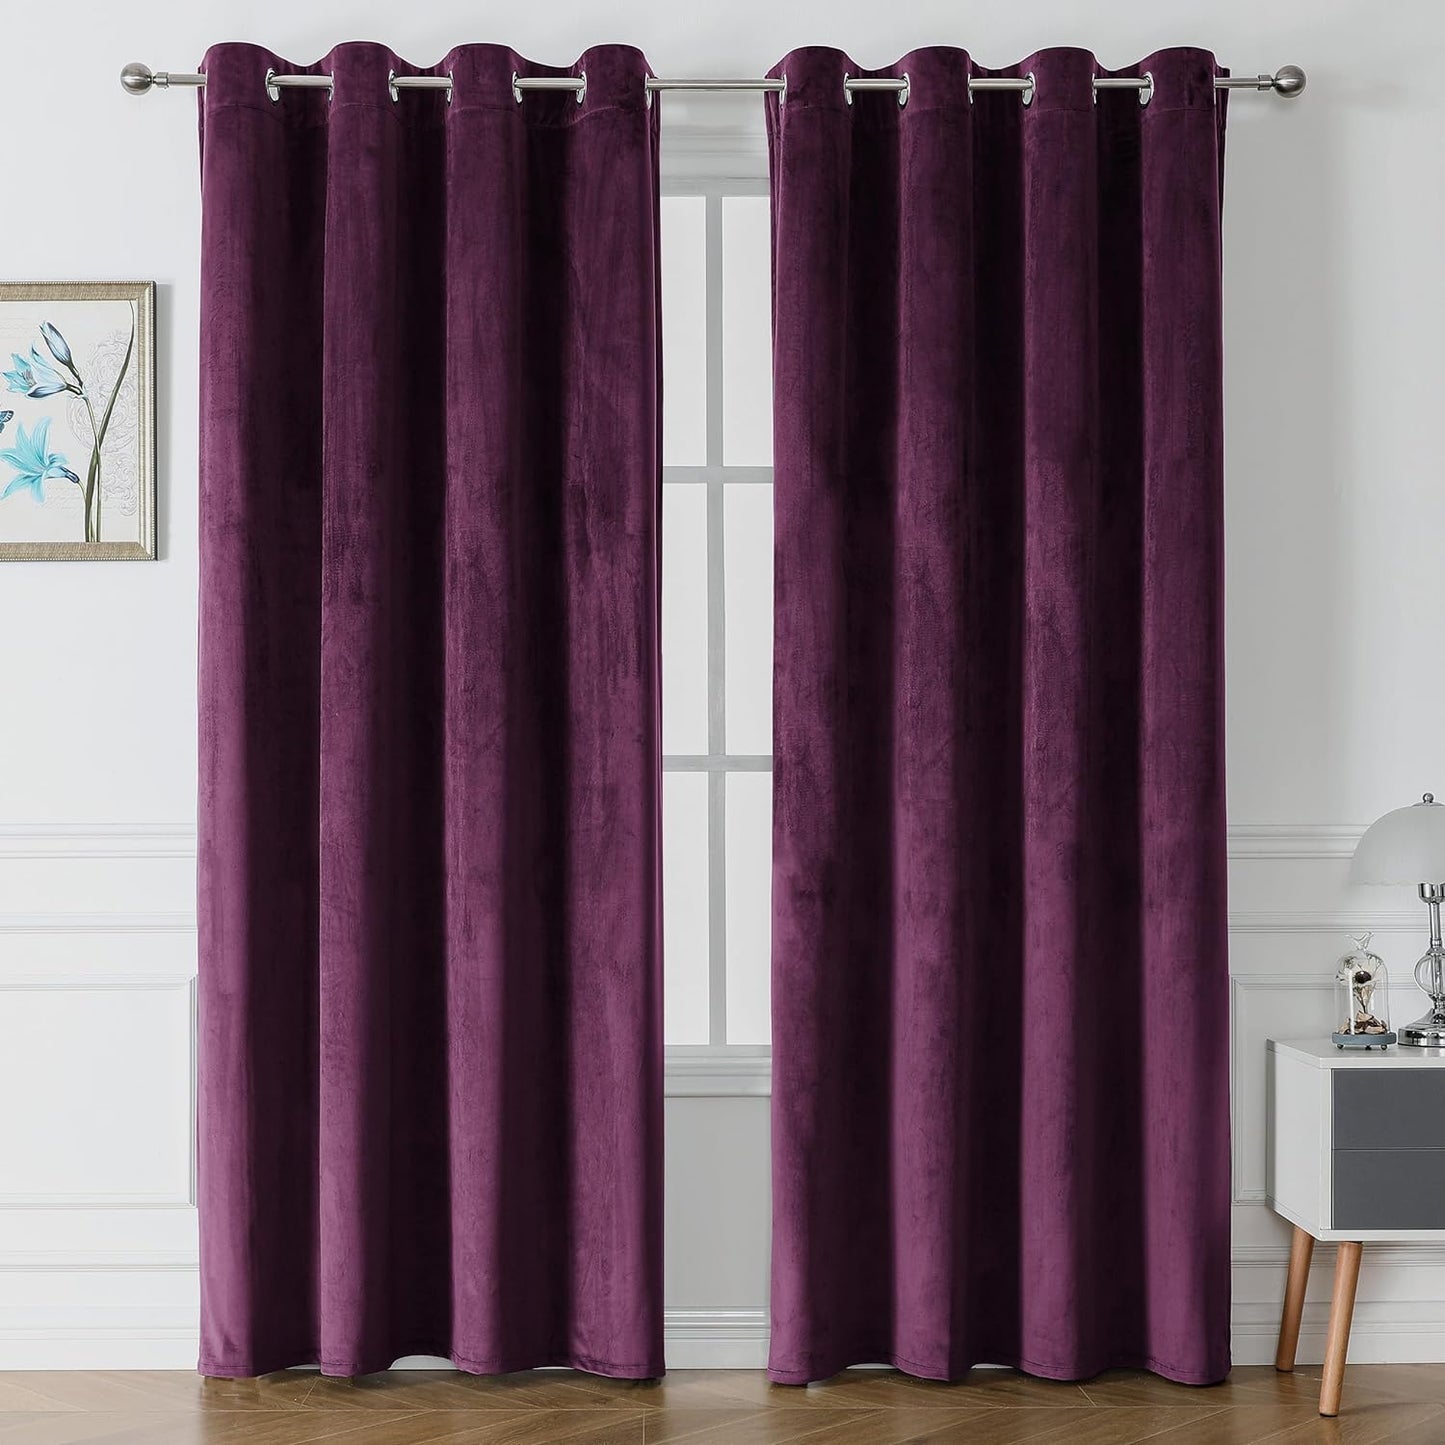 Victree Velvet Curtains for Bedroom, Blackout Curtains 52 X 84 Inch Length - Room Darkening Sun Light Blocking Grommet Window Drapes for Living Room, 2 Panels, Navy  Victree Purple 52 X 96 Inches 